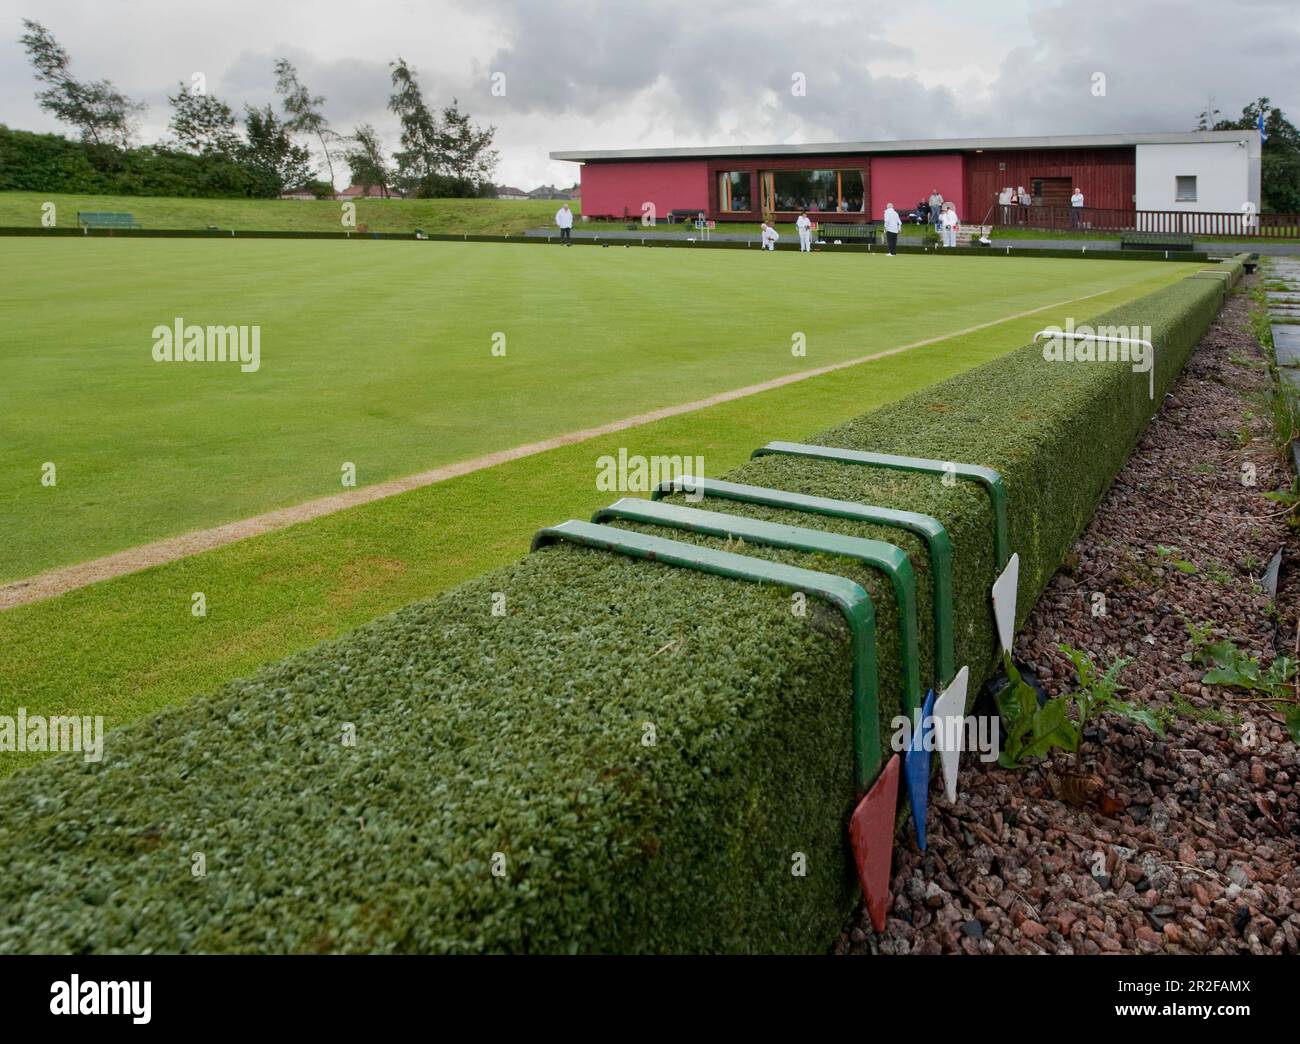 Bowls in play in front of flags at the red pavilion clubhouse at the Balornock lawn bowling green in Glasgow, Scotland, UK Stock Photo